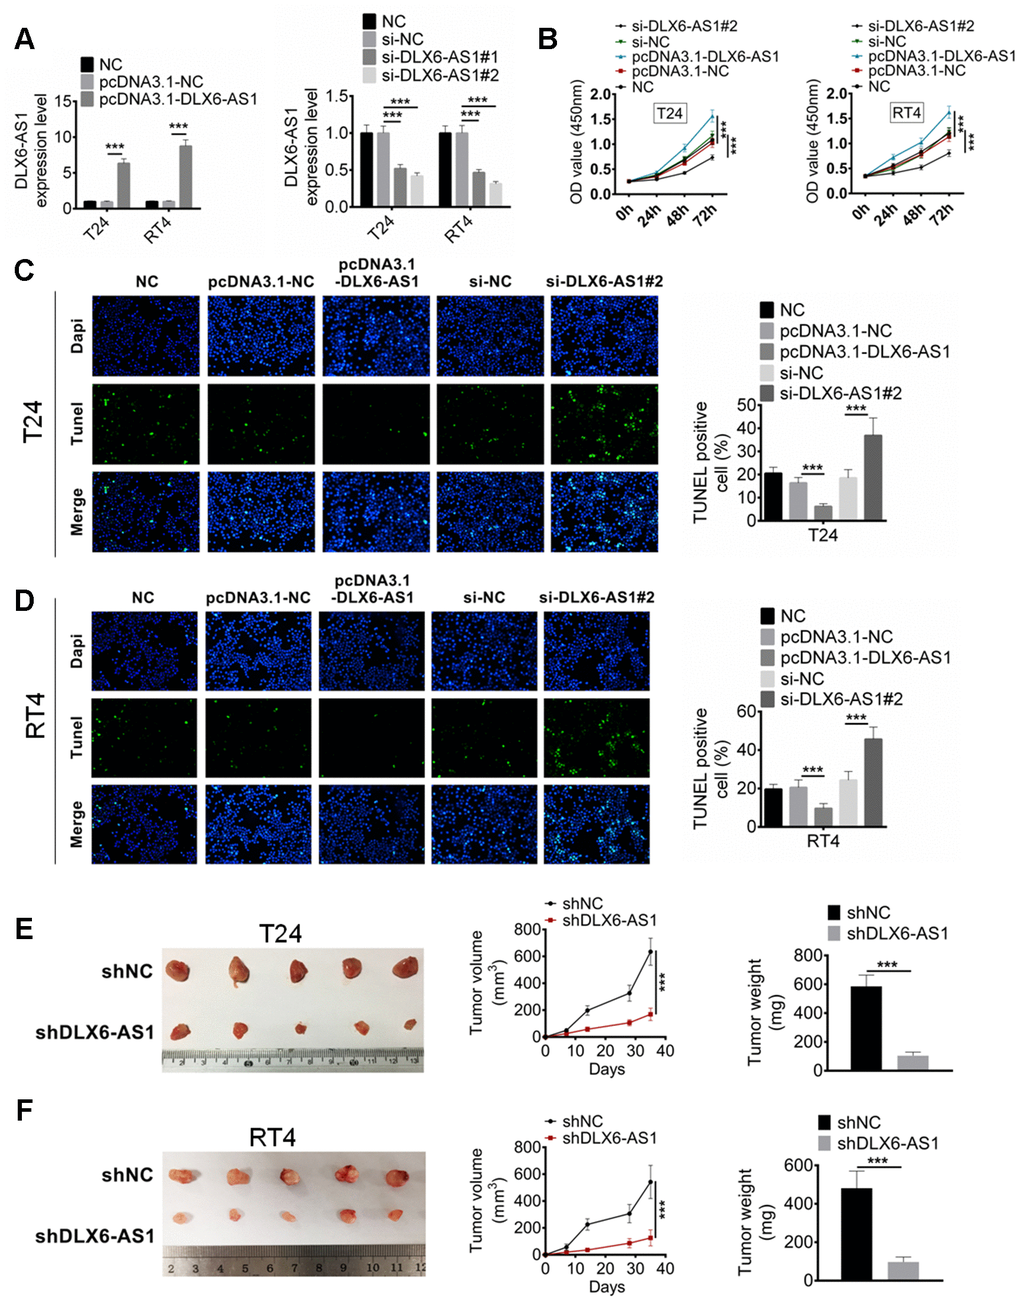 DLX6-AS1 promotes proliferation and inhibits apoptosis of BC cells in vitro and in vivo. (A) The expression of DLX6-AS1 was over-expressed by pcDNA3.1-DLX6-AS1 or down-regulated by sh-DLX6-AS1 in T24 and RT4 cells, and the transfection efficiency was identified by qRT-PCR. (B) Cell proliferation of T24 and RT4 cells with pcDNA3.1-DLX6-AS1 or sh-DLX6-AS1 transfection was determined by CCK-8 assay. (C, D) The apoptosis of T24 and RT4 cells with pcDNA3.1-DLX6-AS1 or sh-DLX6-AS1 transfection was determined by TUNEL staining assay. (E, F) A subcutaneous BC tumor model (n=6/group) was established by using T24 and RT4 cells to evaluate the anti-tumor effect of shDLX6-AS1, and tumor volume and weight were calculated. Data were expressed as the mean ± SD. ***P 